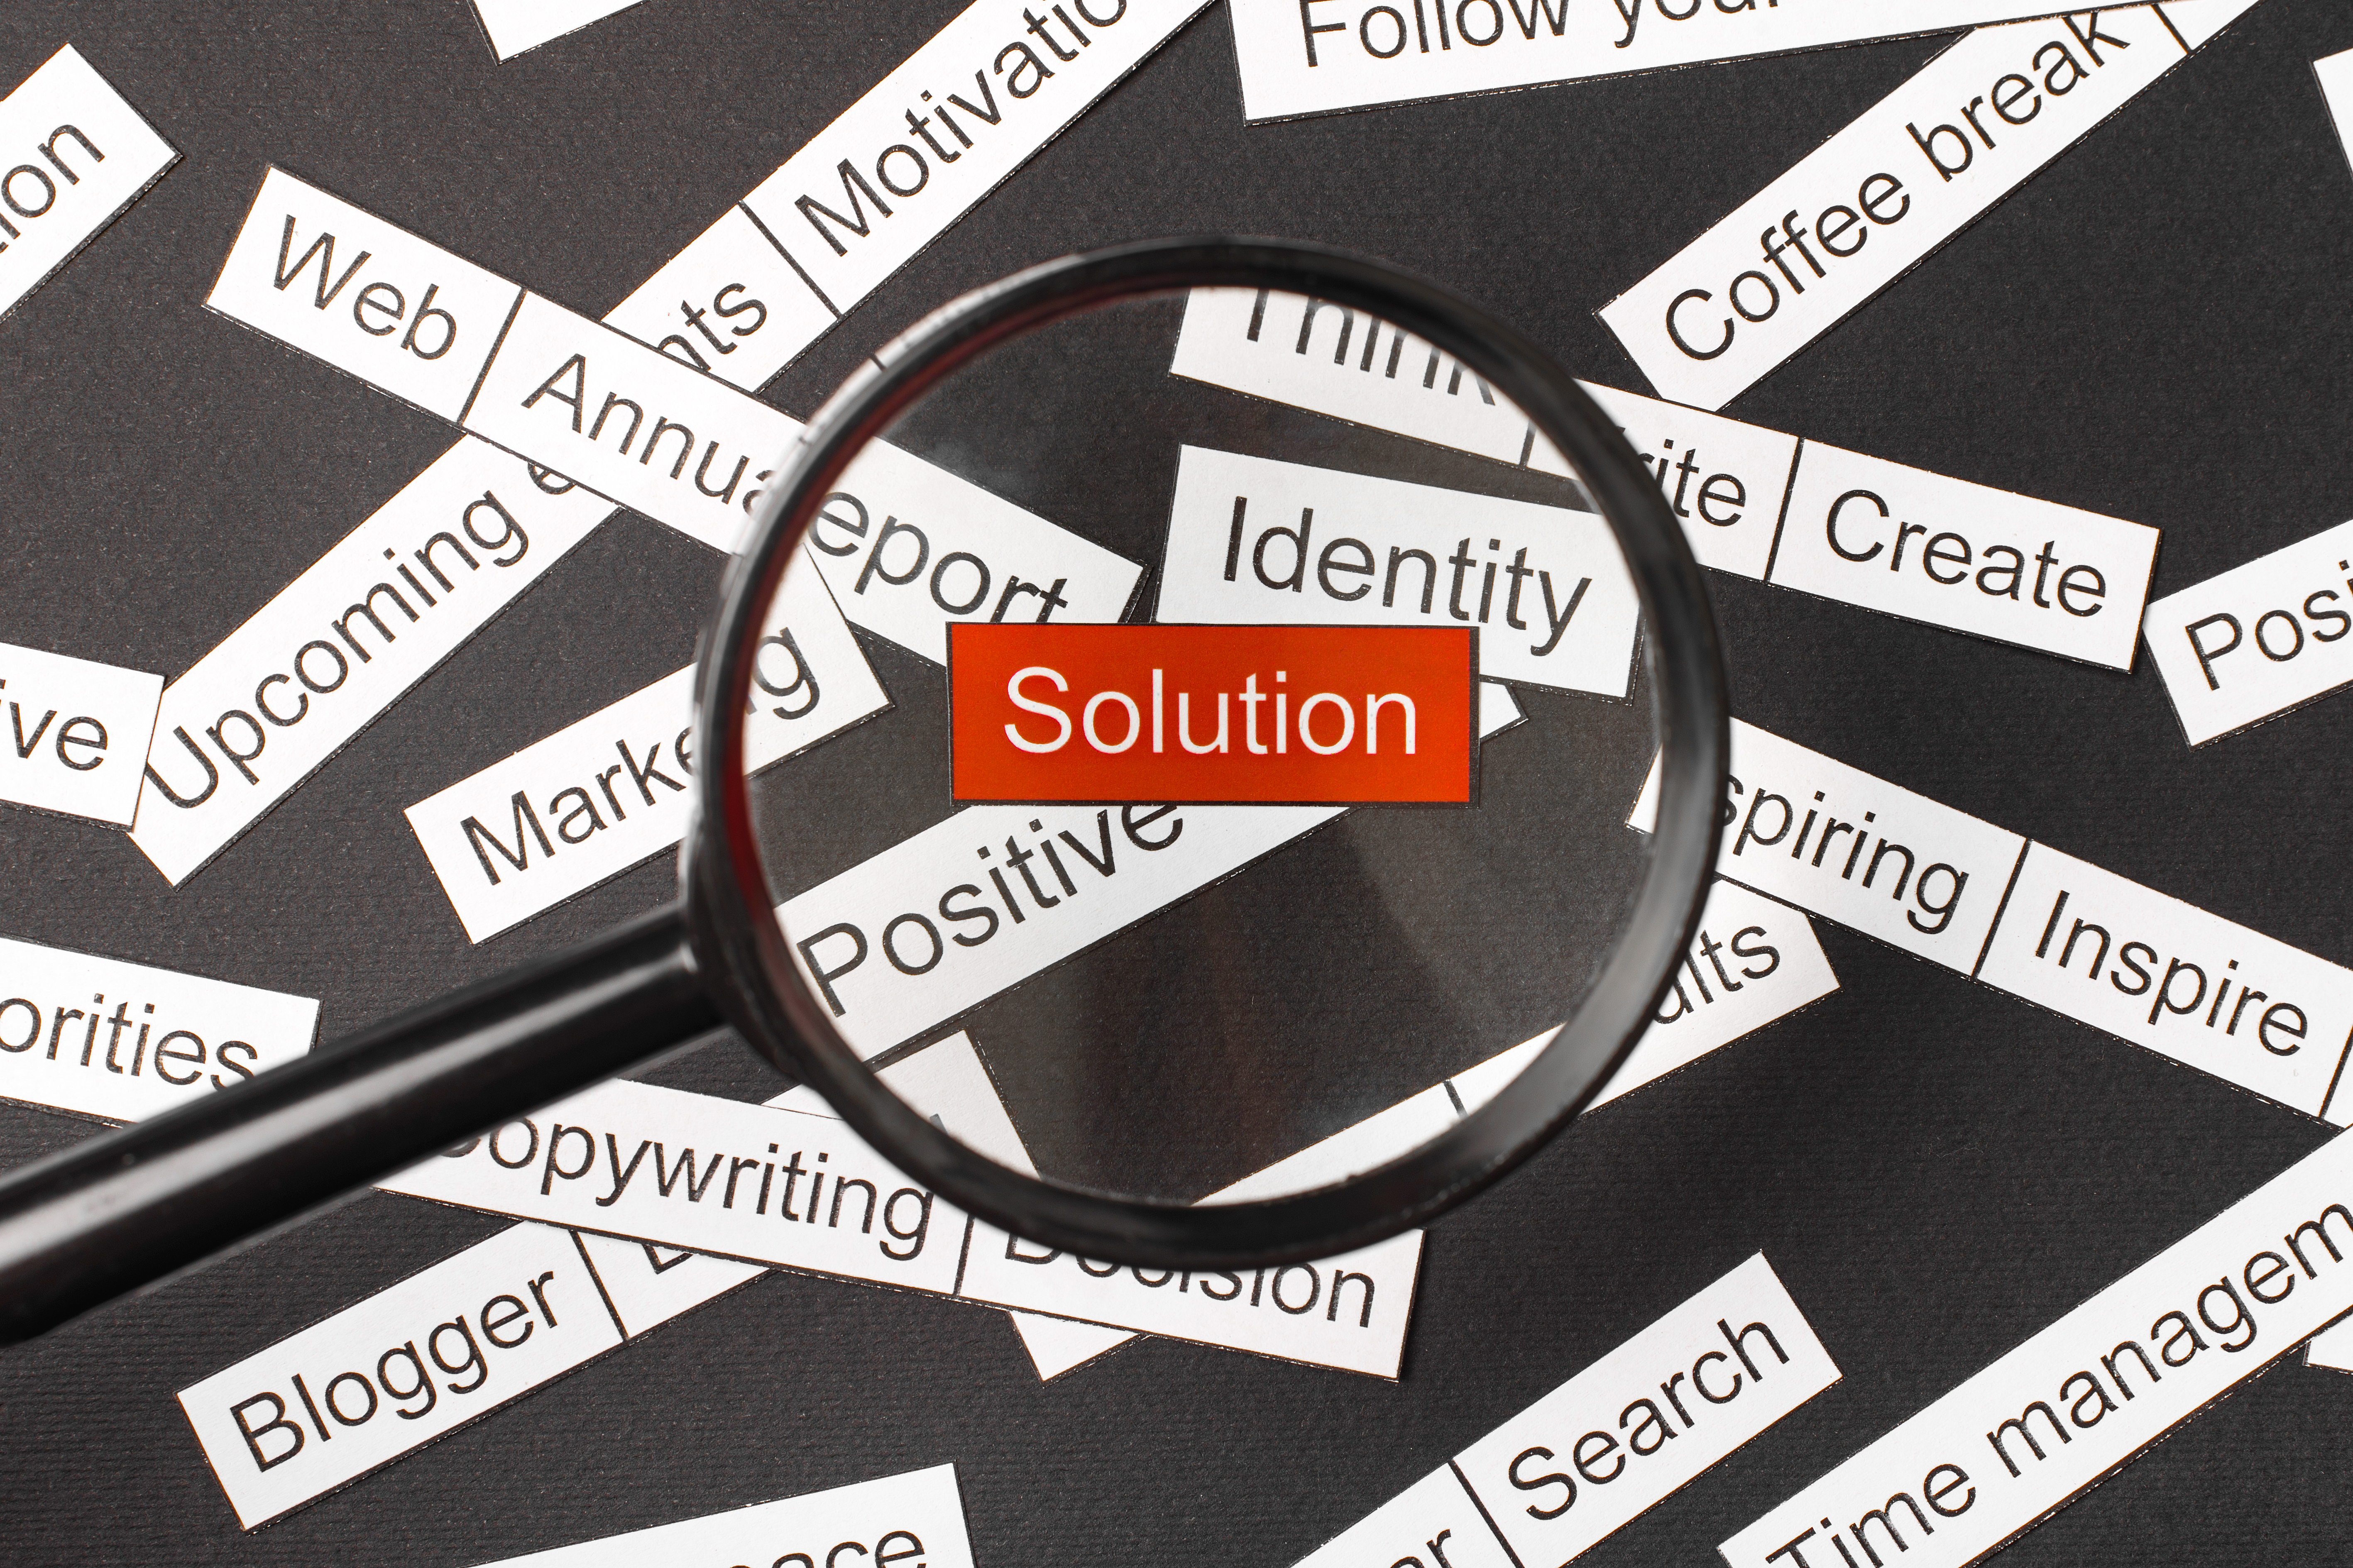 Why is HubSpot + Salesforce integration the best solution?